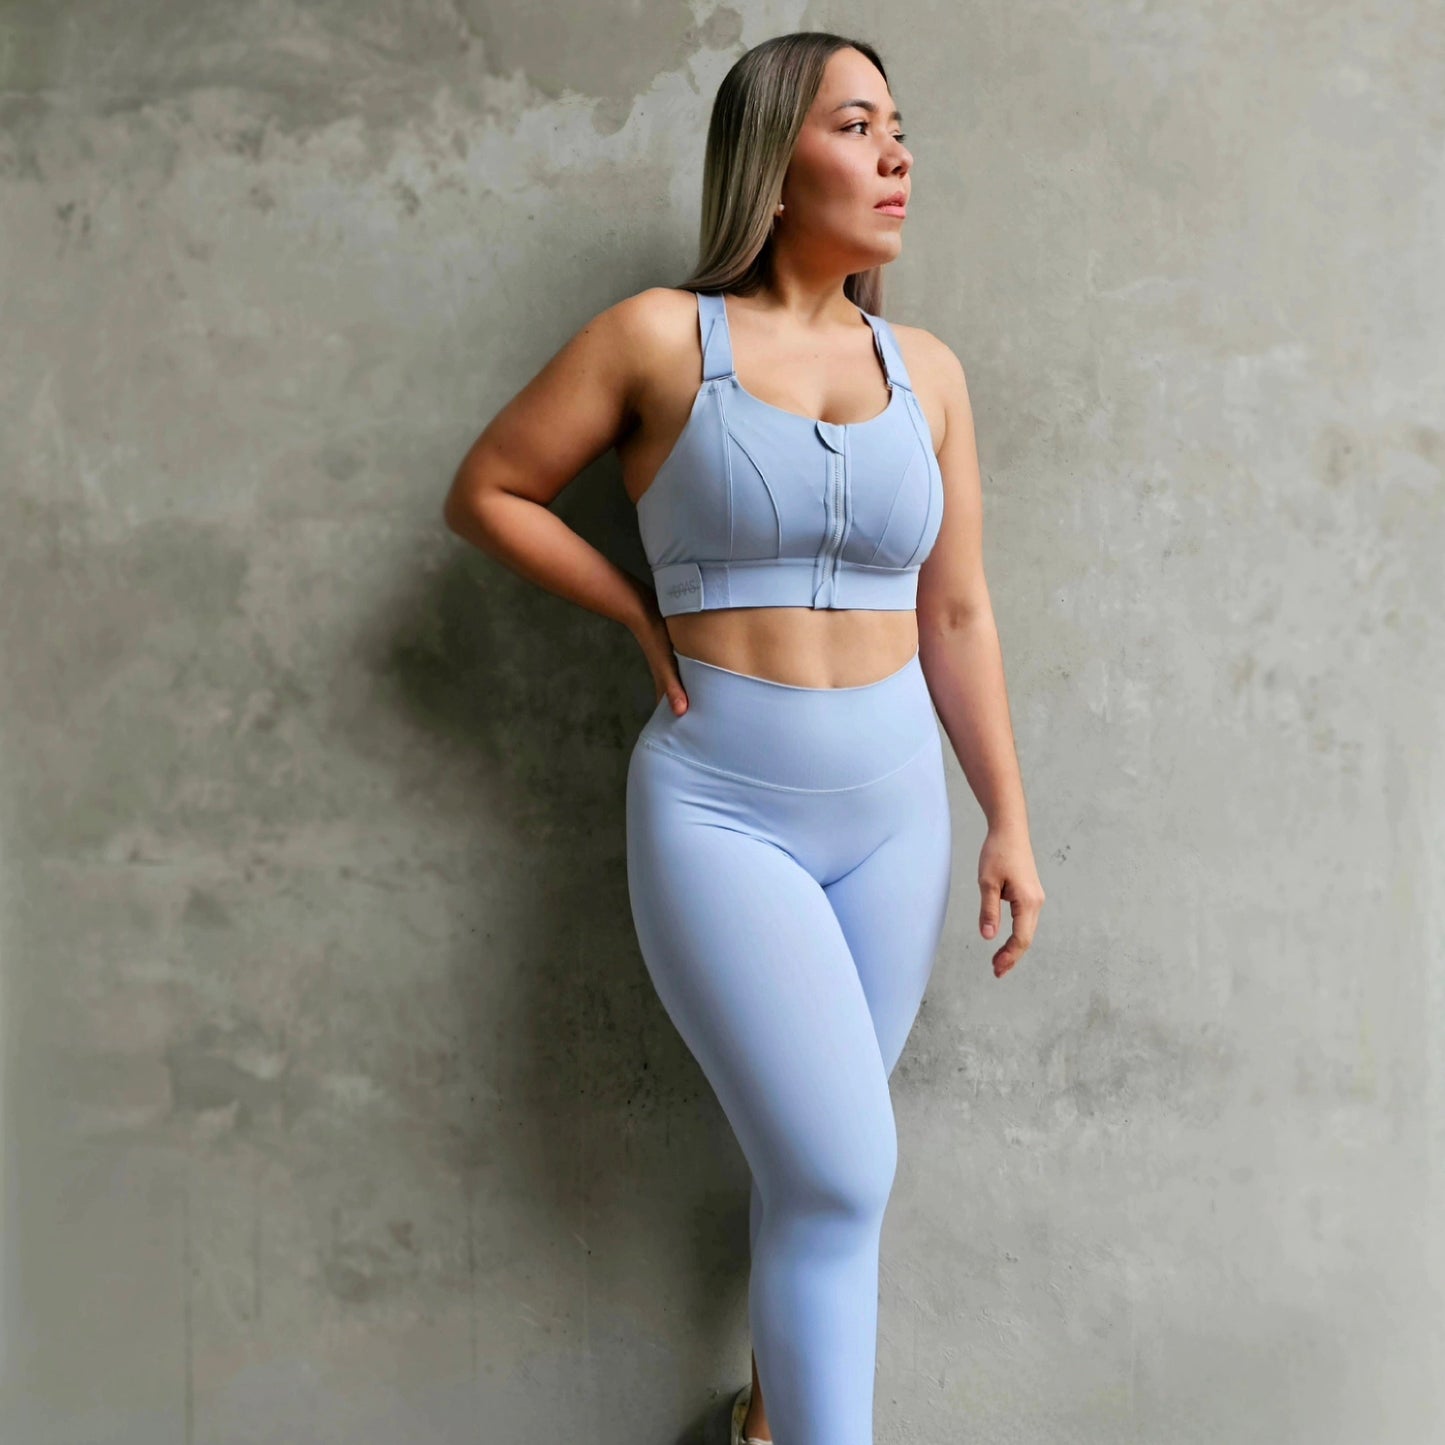 Fitness model wearing a super cute baby blue  gym matching set from Vibras Activewear.